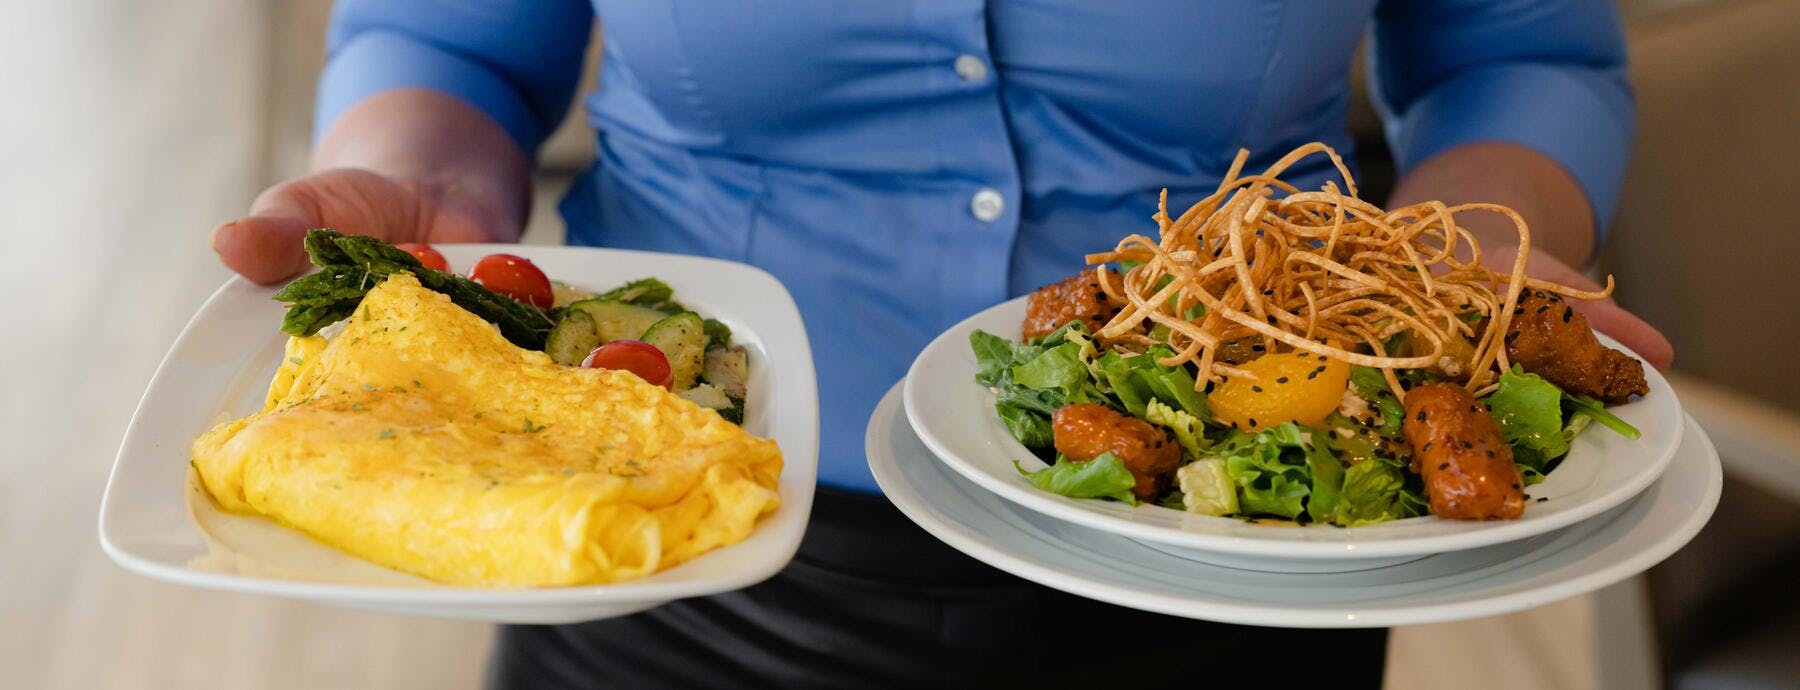 Dining Options of Omlette and Mandarine Chicken Salad